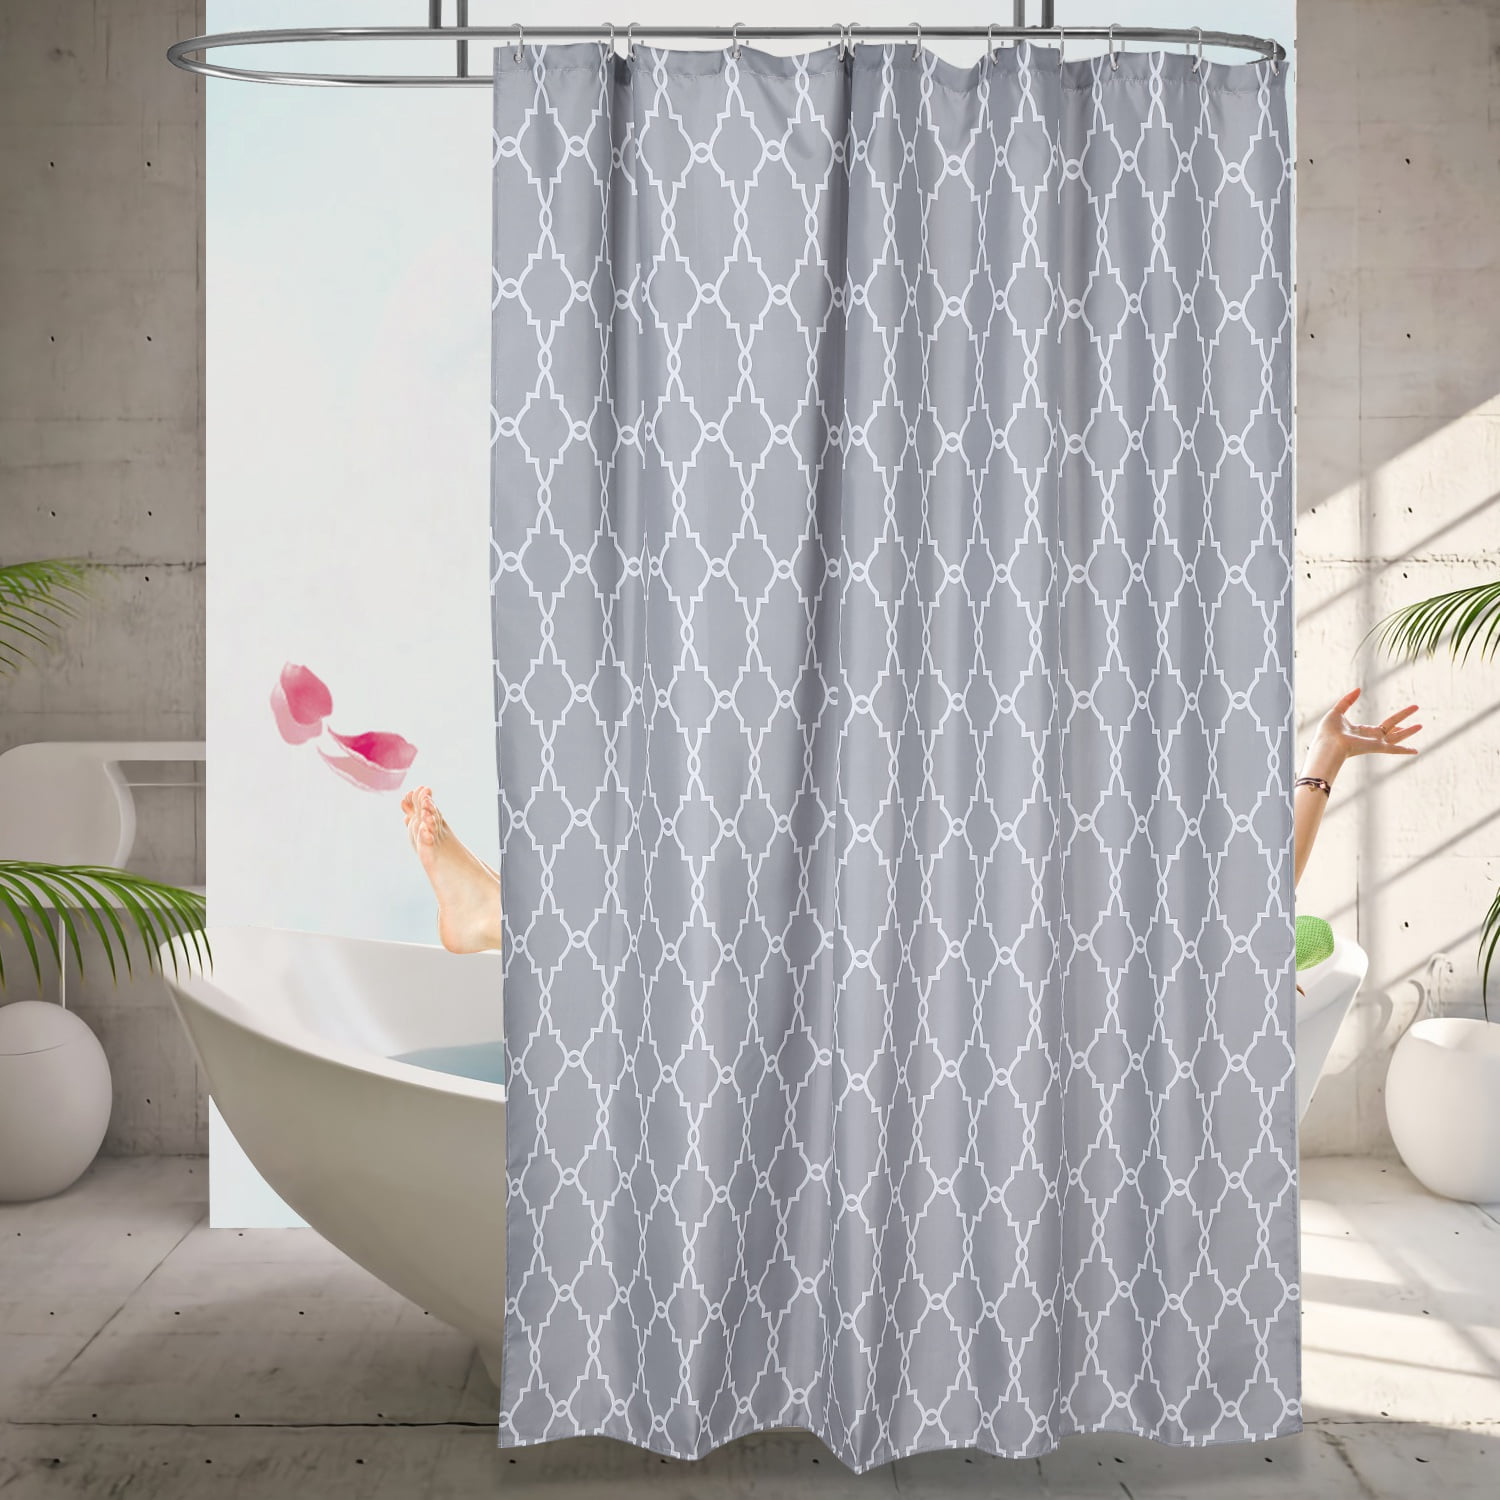 Shower Curtain Waterproof 70x70 Inches, How To Hang Fabric Shower Curtain Liner